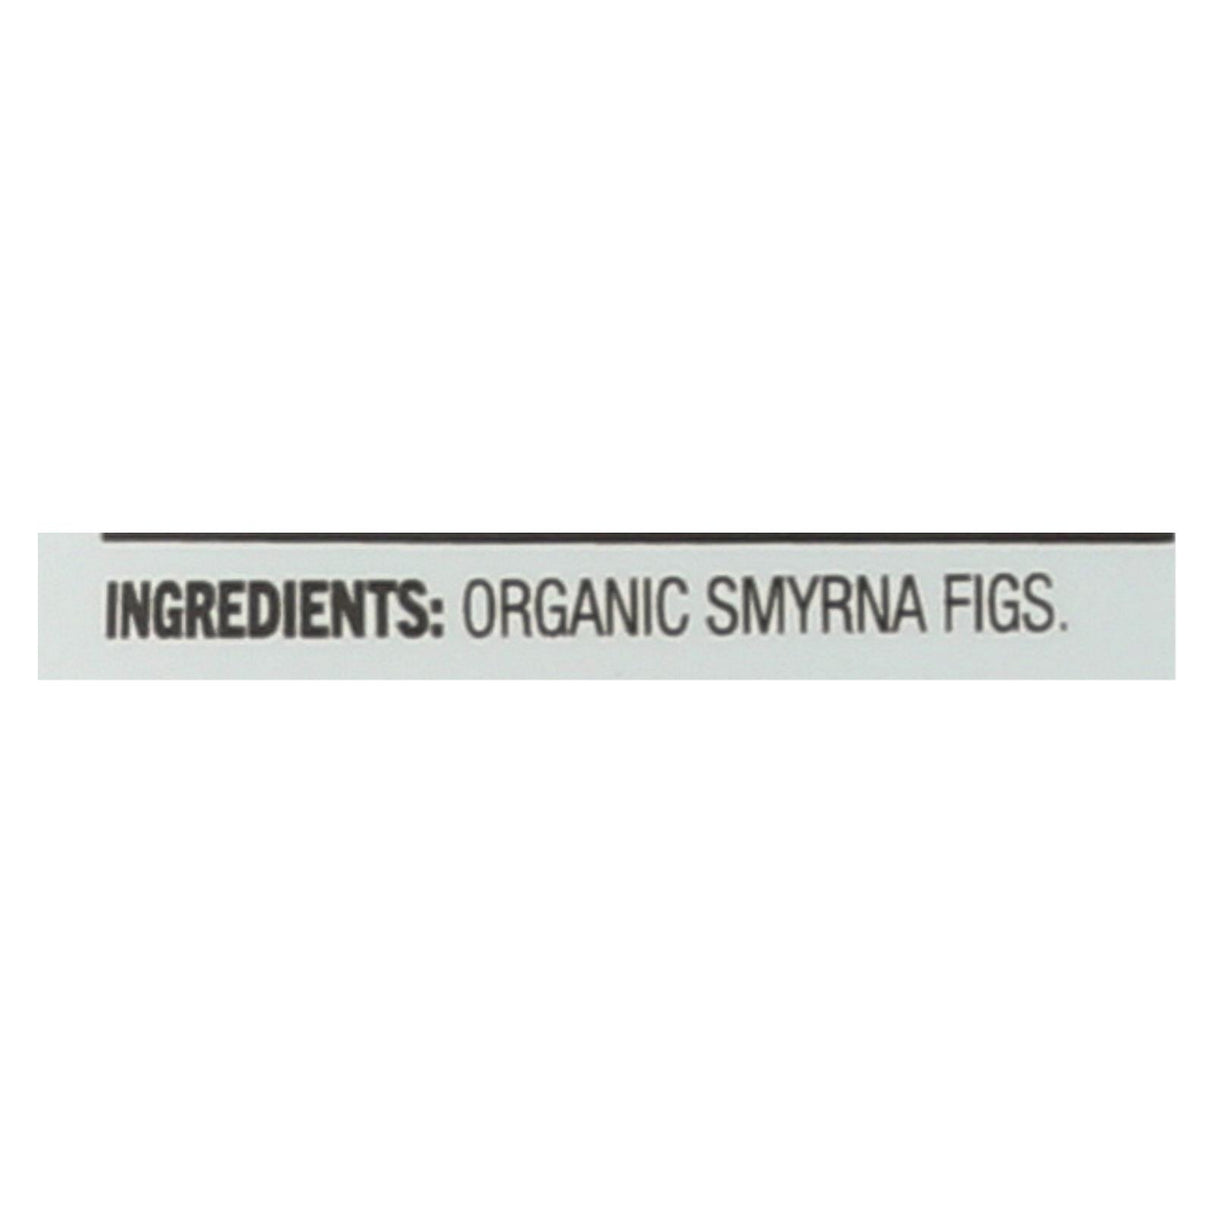 Made In Nature Dried Smyrna Figs  - Case Of 6 - 7 Oz